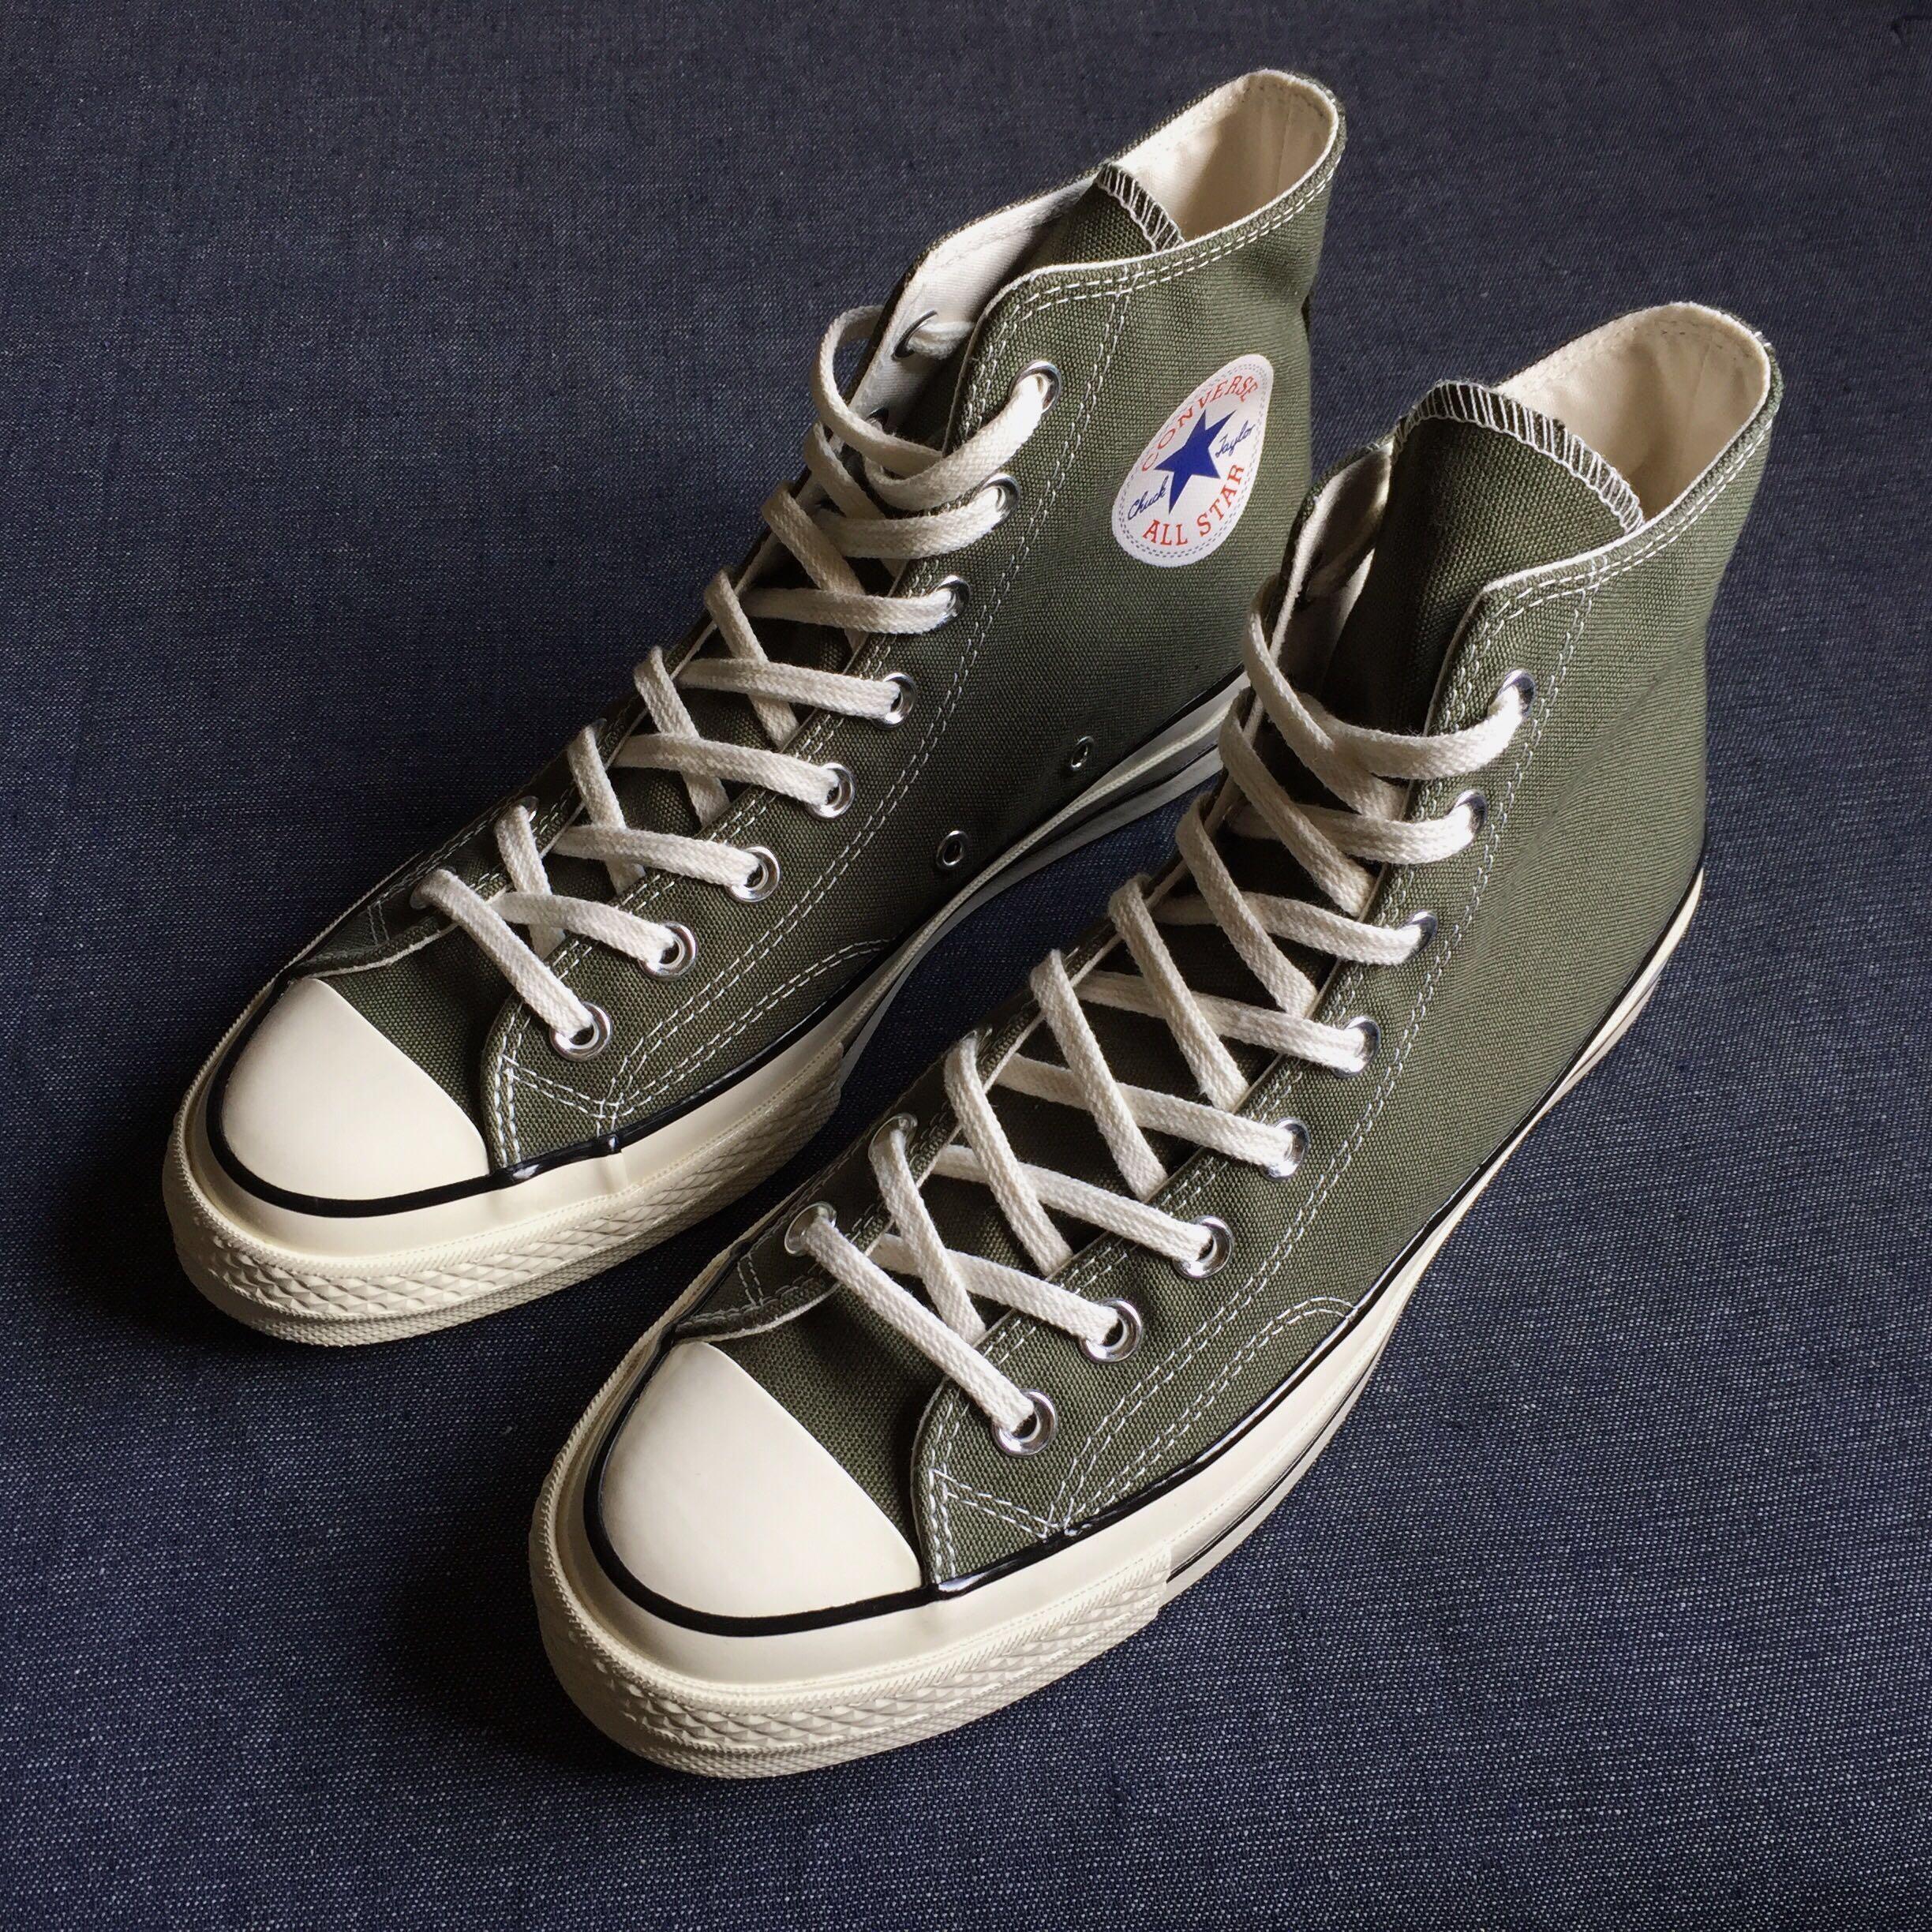 converse olive sneakers